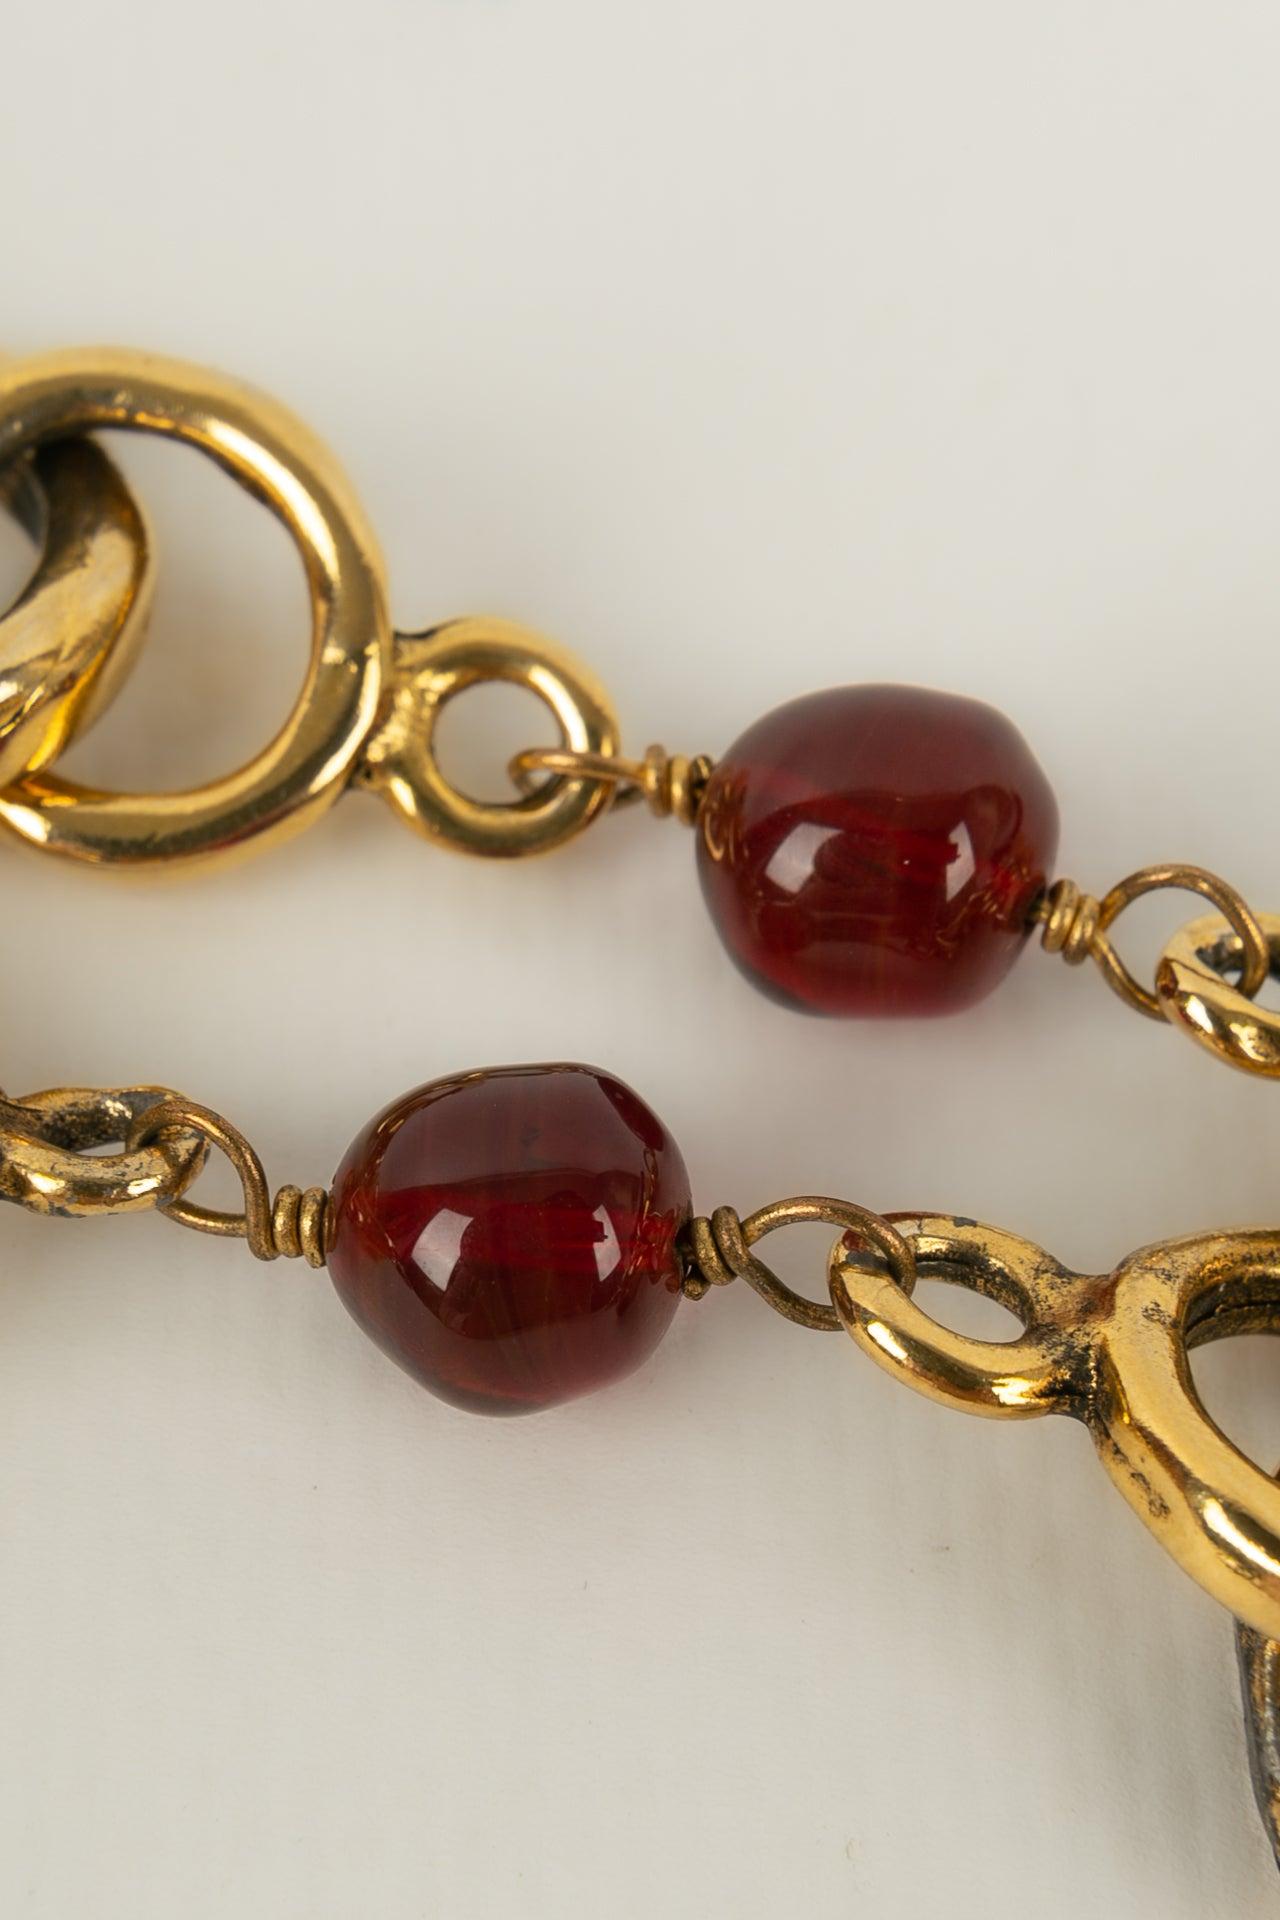 Chanel Long Necklace in Gold Metal and Red Glass Beads, 1984 For Sale 3